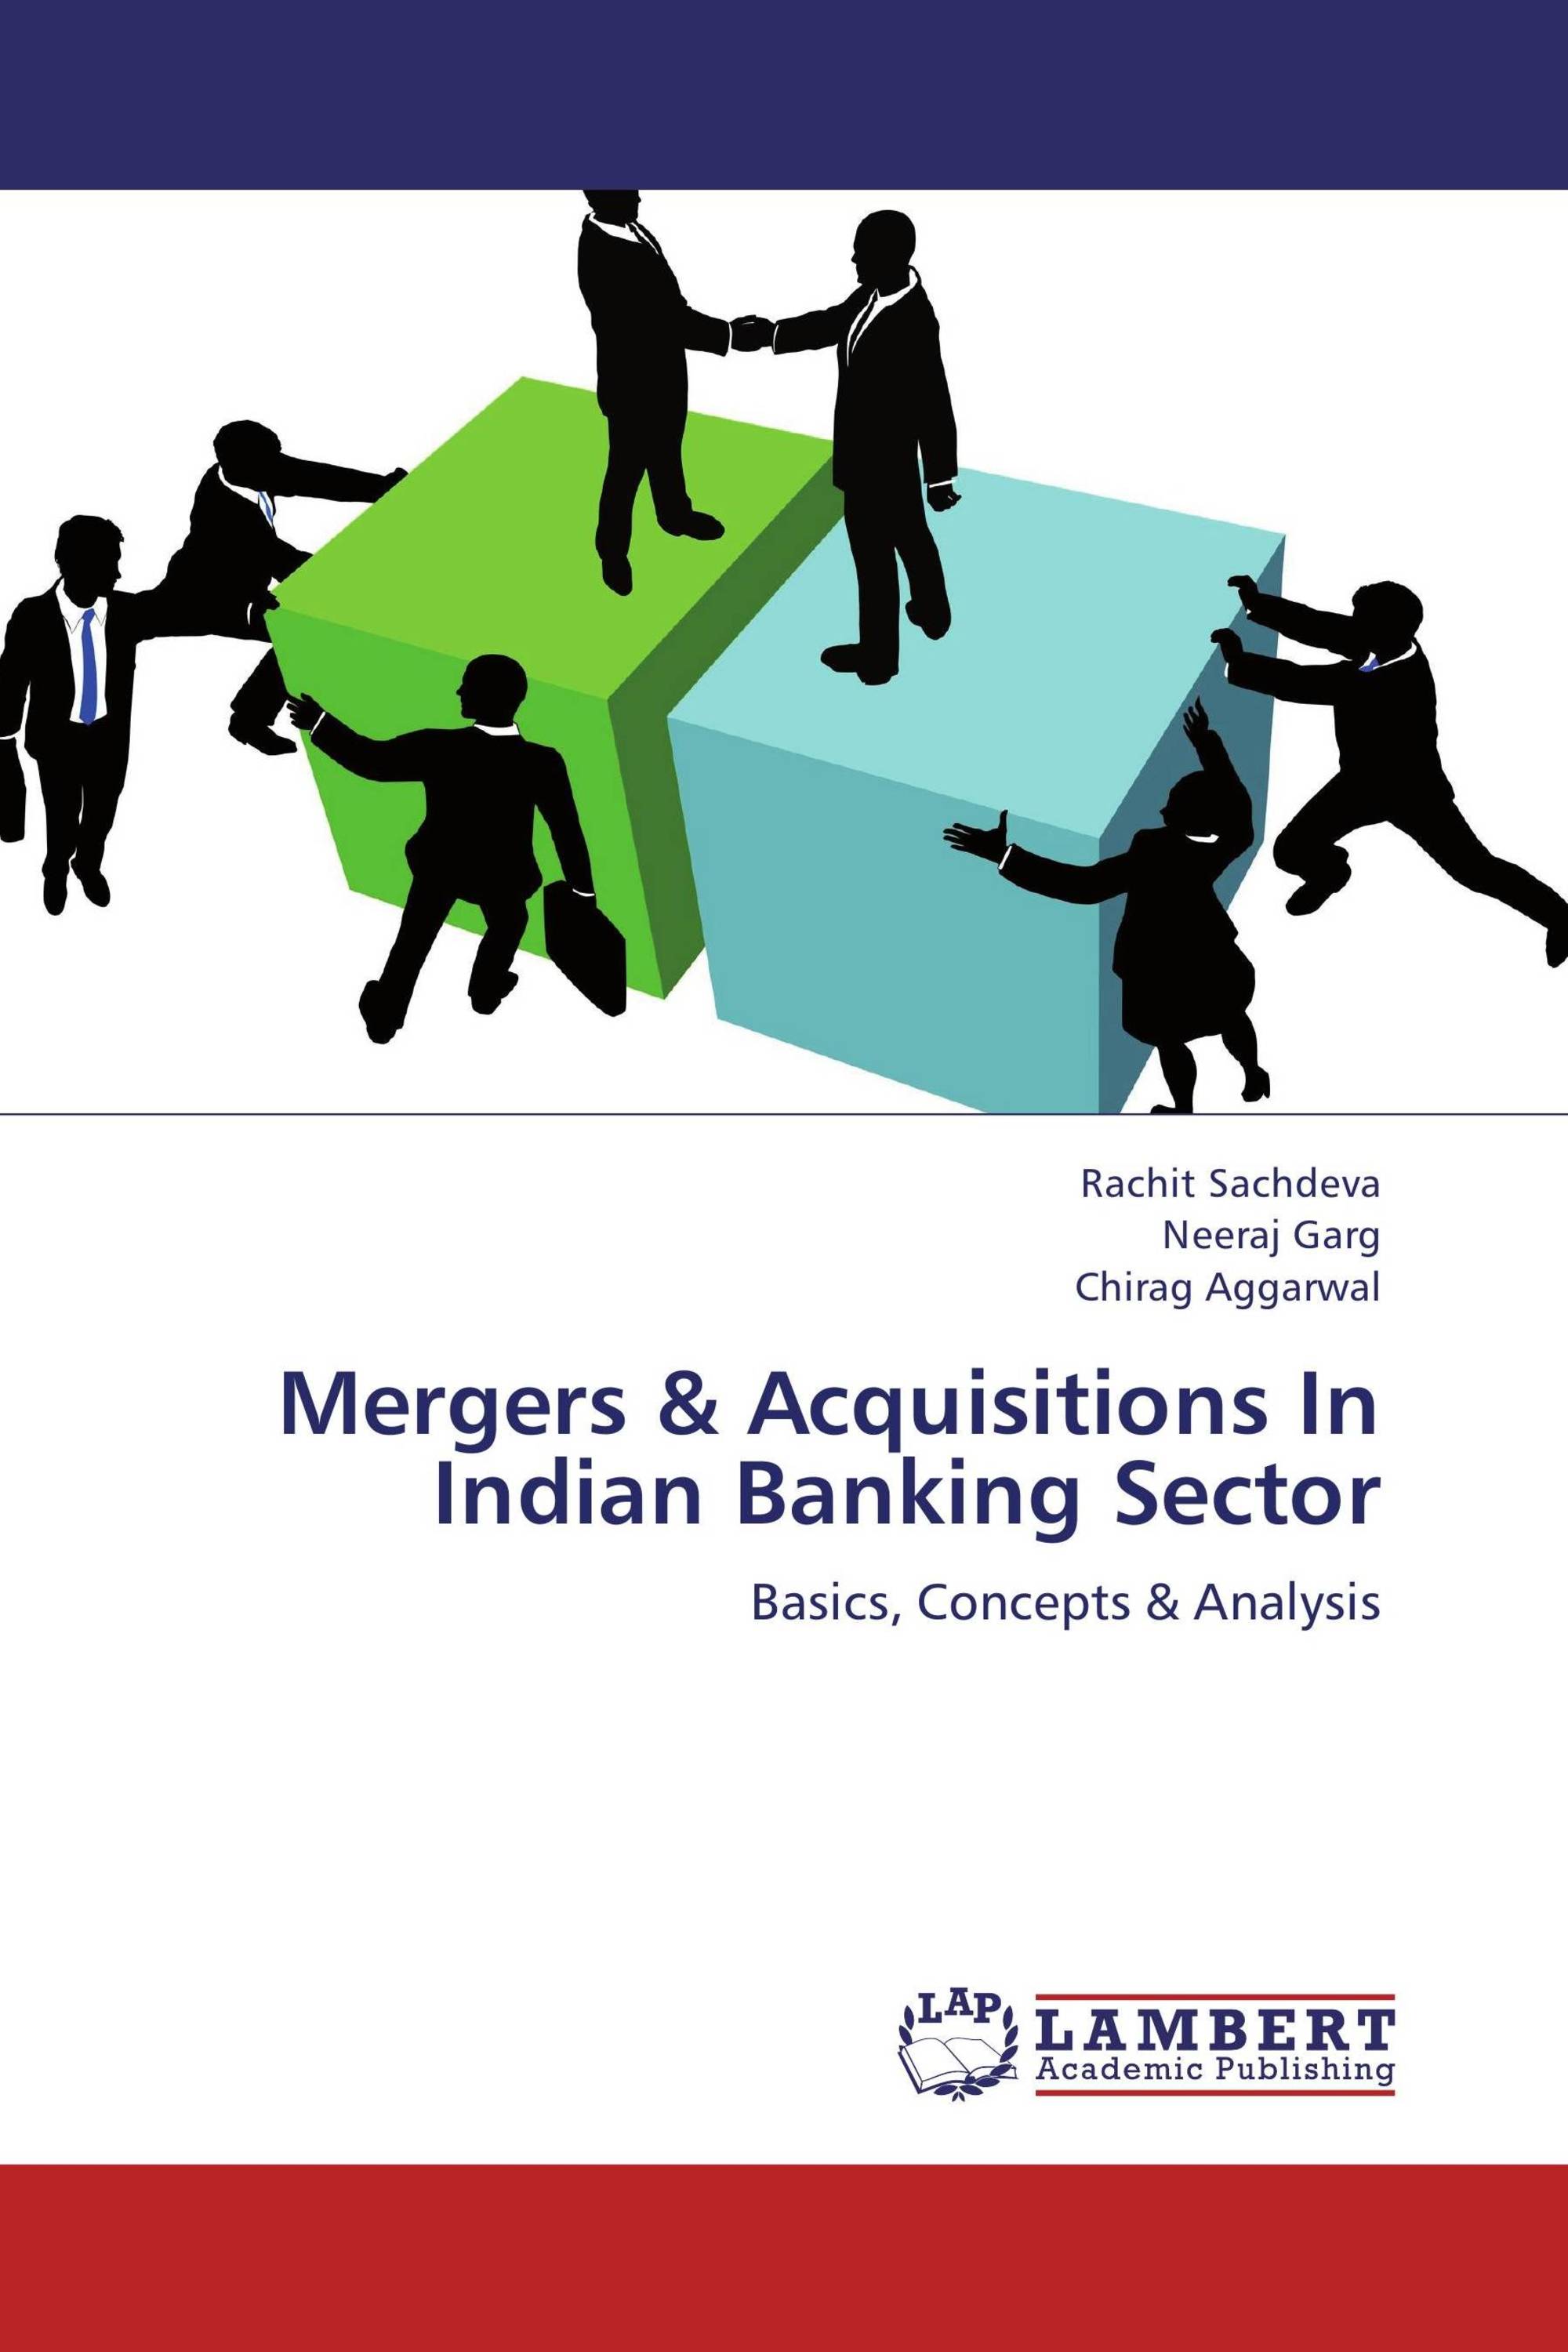 case study merger and acquisition of indian banks